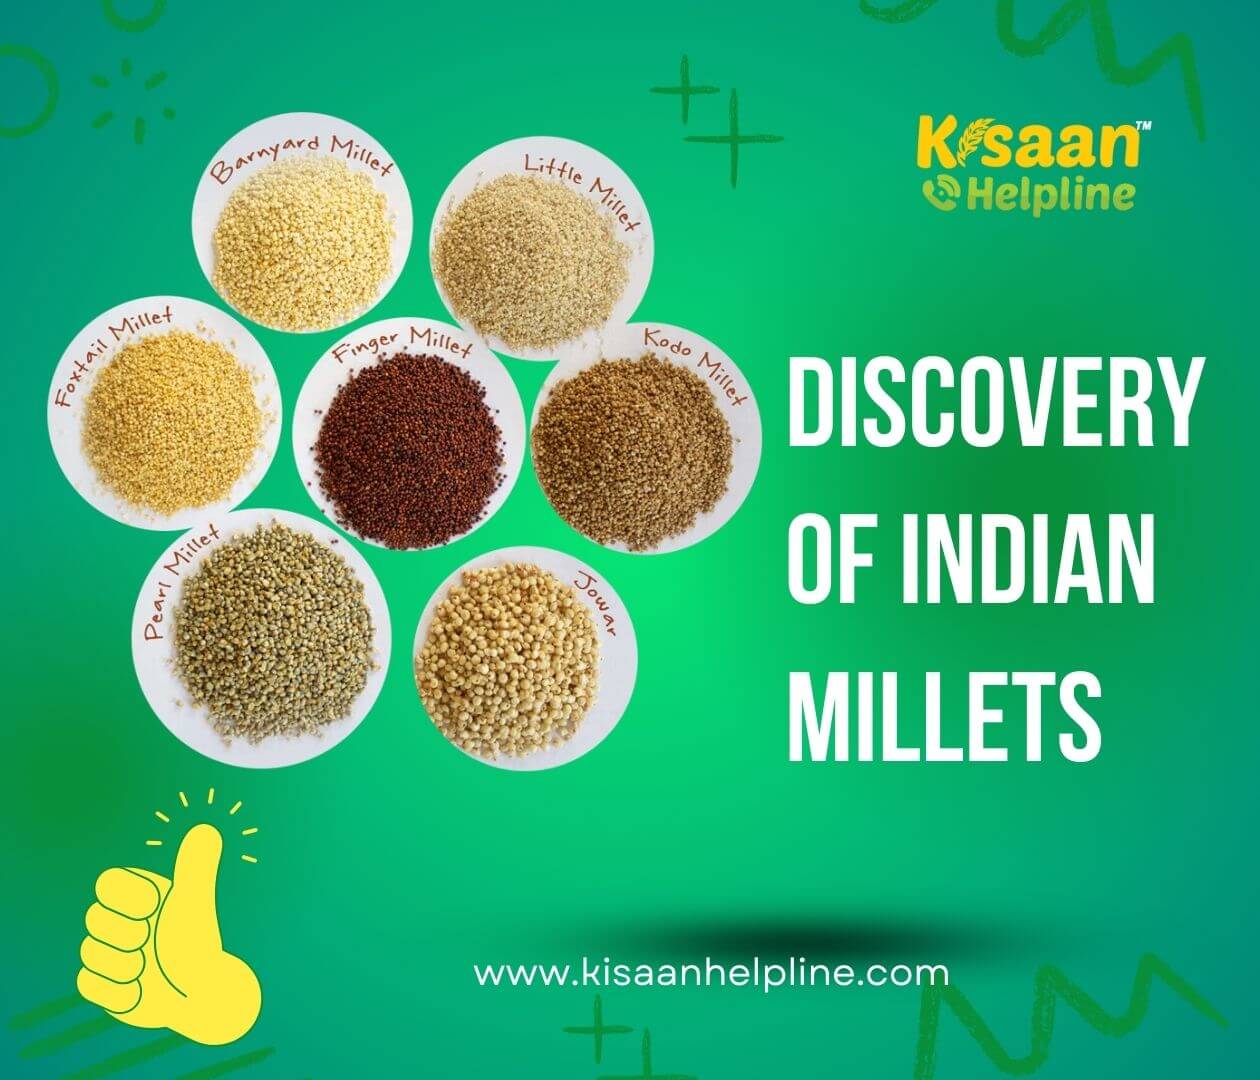 Discovery of Indian Millets  Nutritional Powers Unveiled - Madhya Pradesh - Indore ID1563581